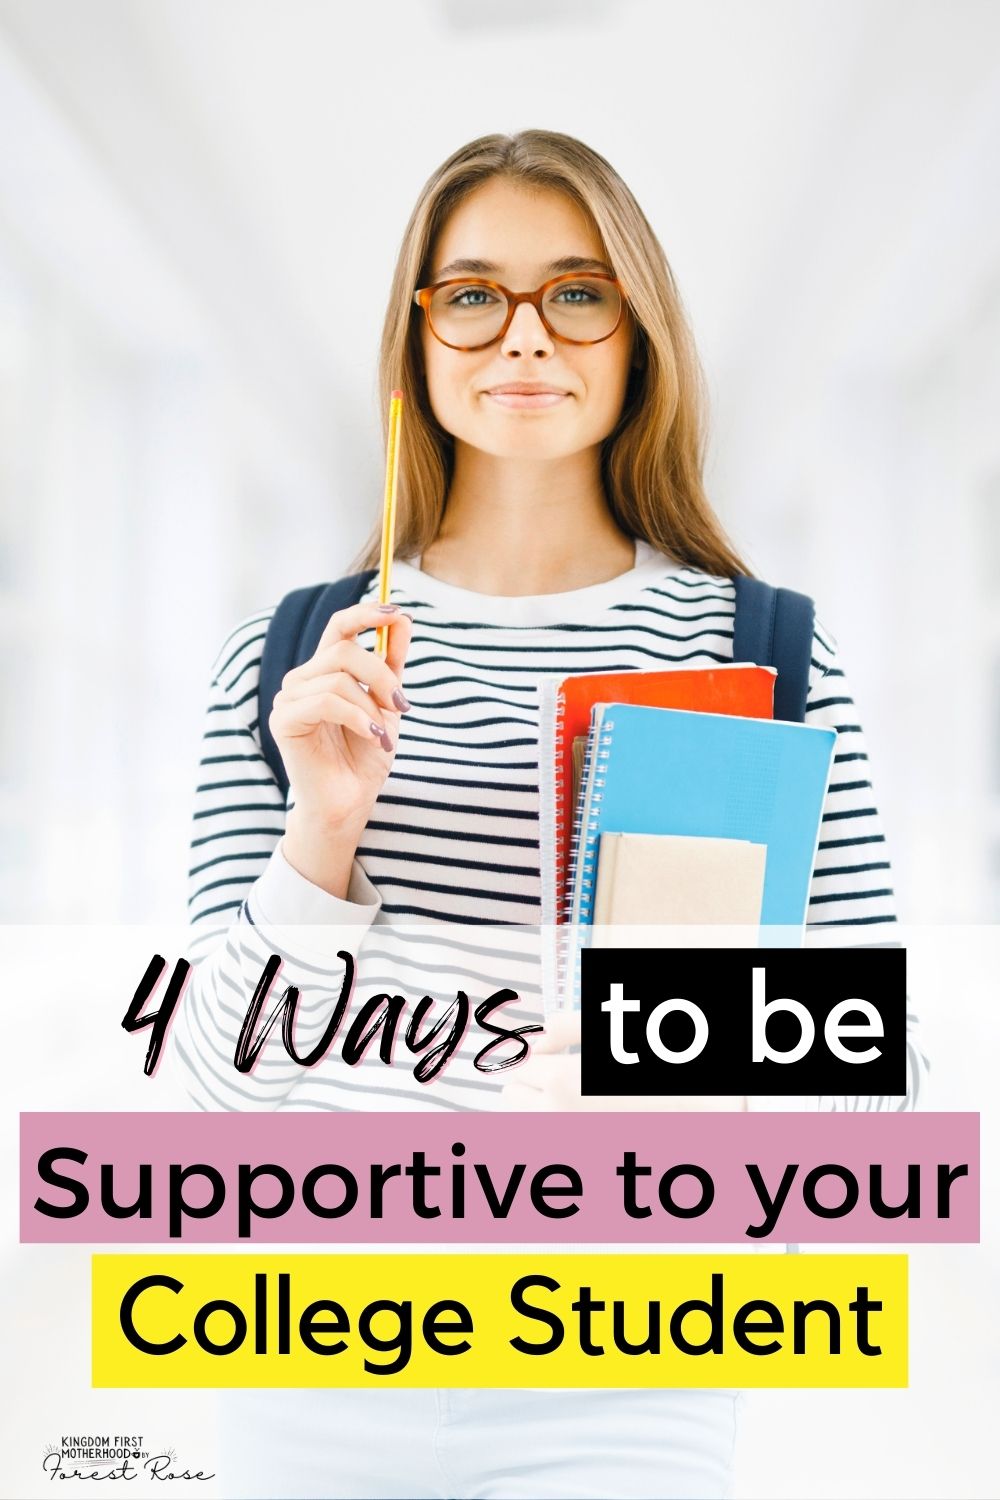 4 Ways to be Supportive of Your College Student